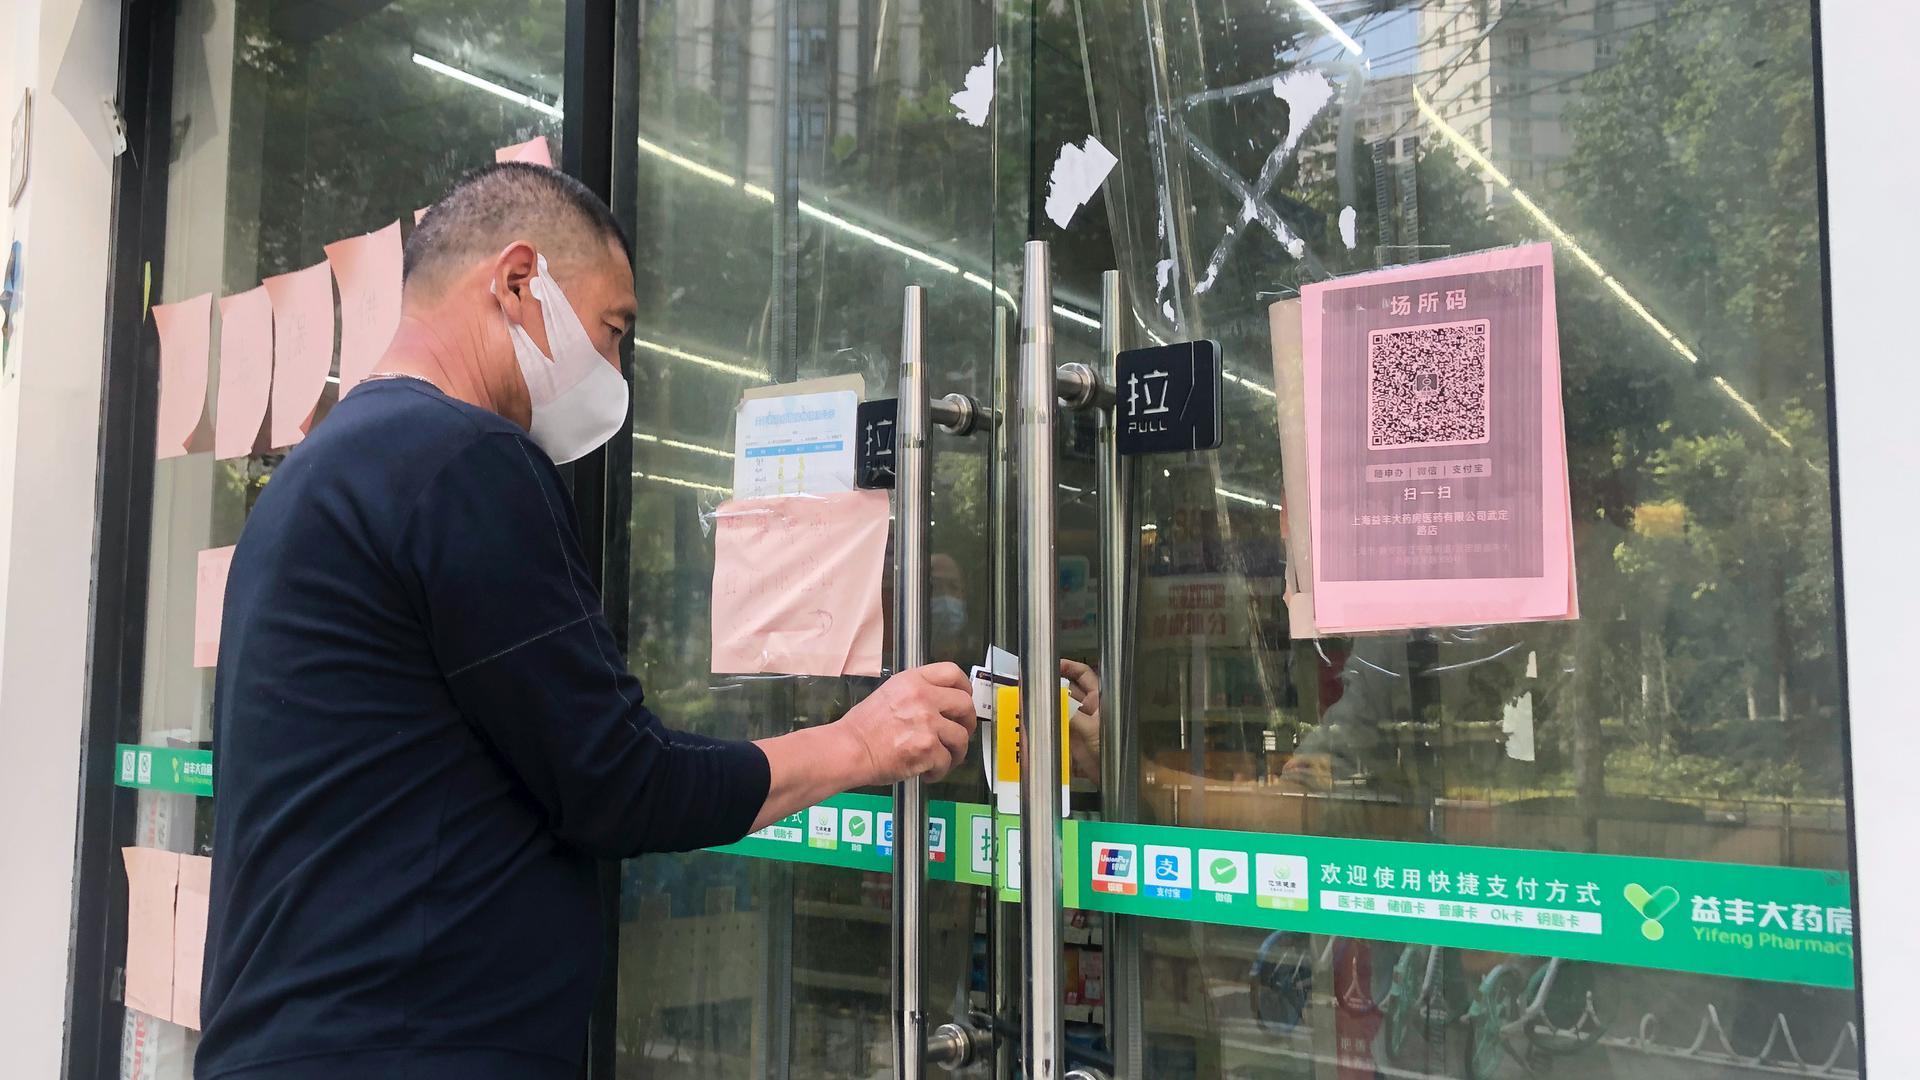 A man tries to receive medicine he bought at a pharmacy through its closed glass doors in Shanghai, China, May 22, 2022.